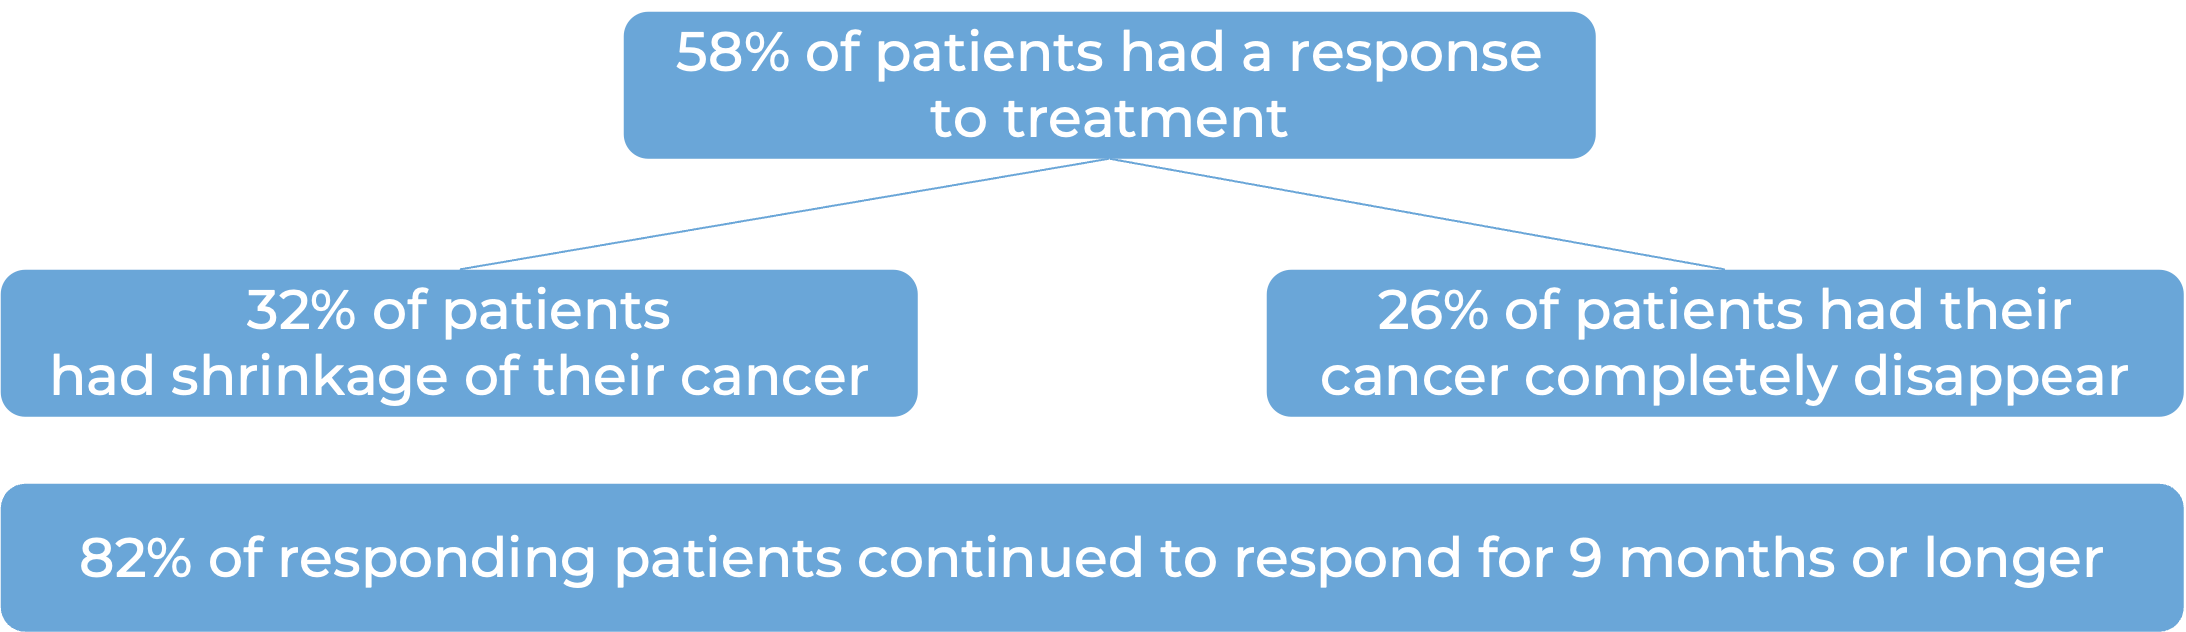 Results after treatment with Elrexfio (diagram)